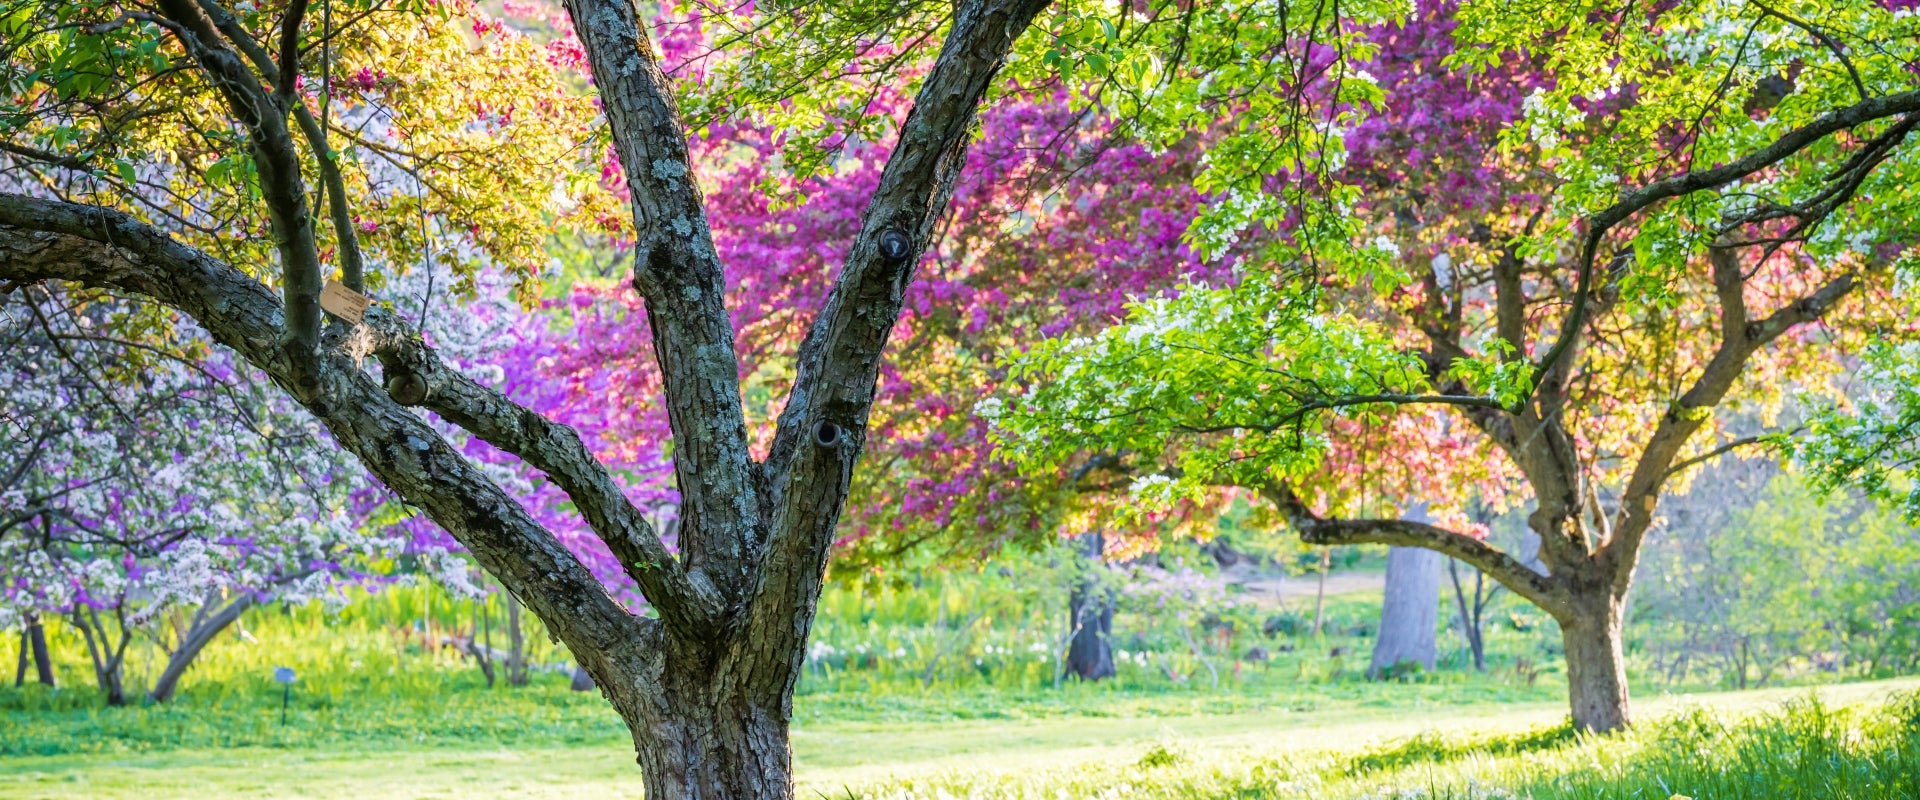 Colorful spring tree in bloom with pink and white flowers and green foliage.